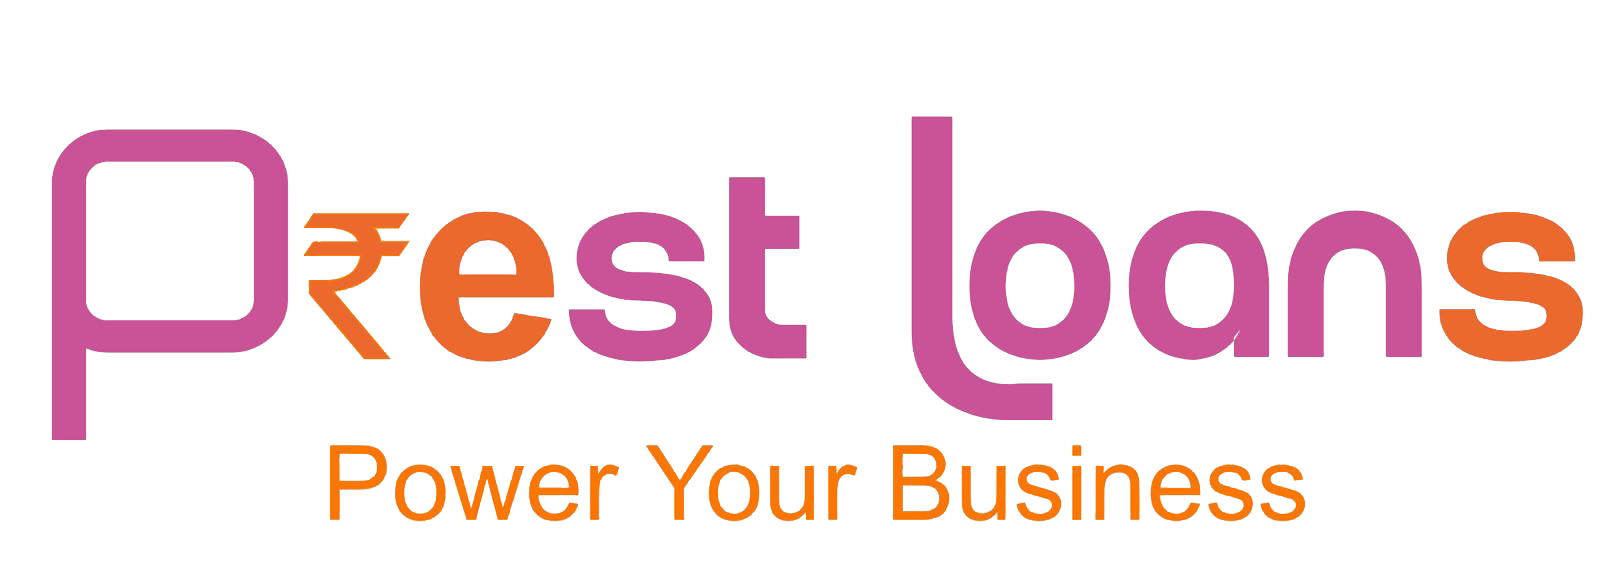 Apply for Loans in India-Quick business loan